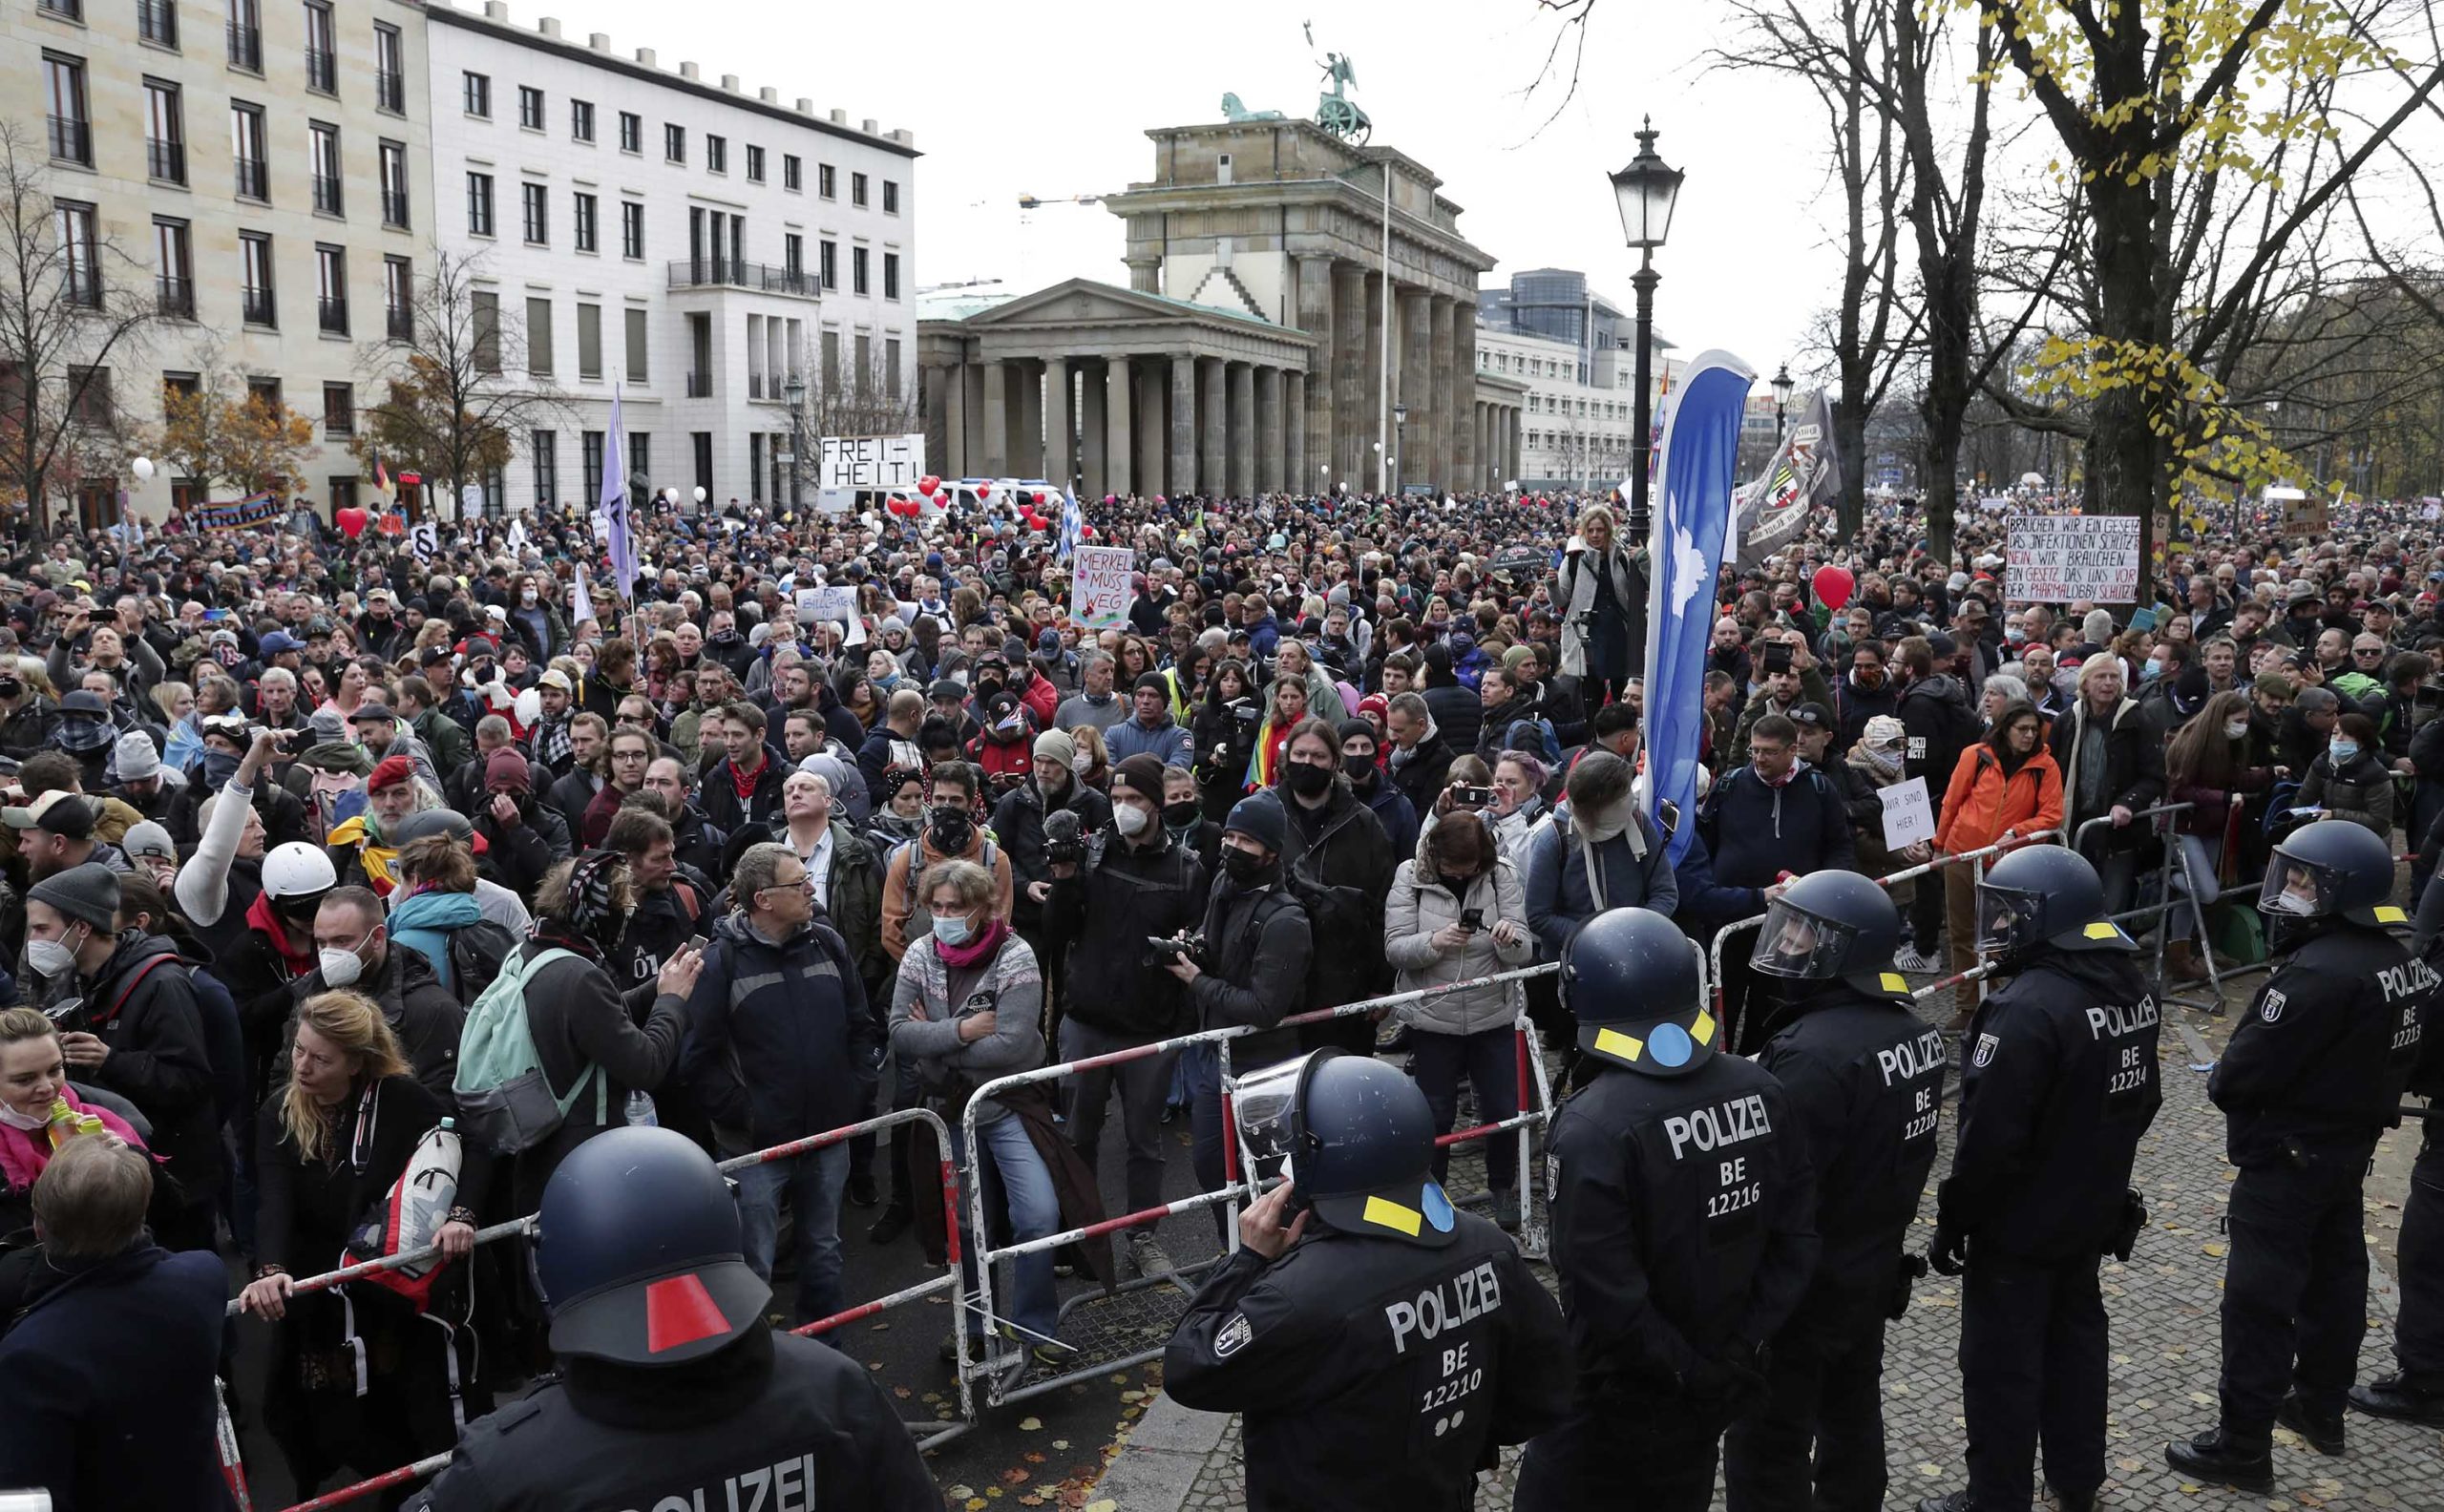 Berlin police deploy water cannon as protesters march against Covid-19 restrictions